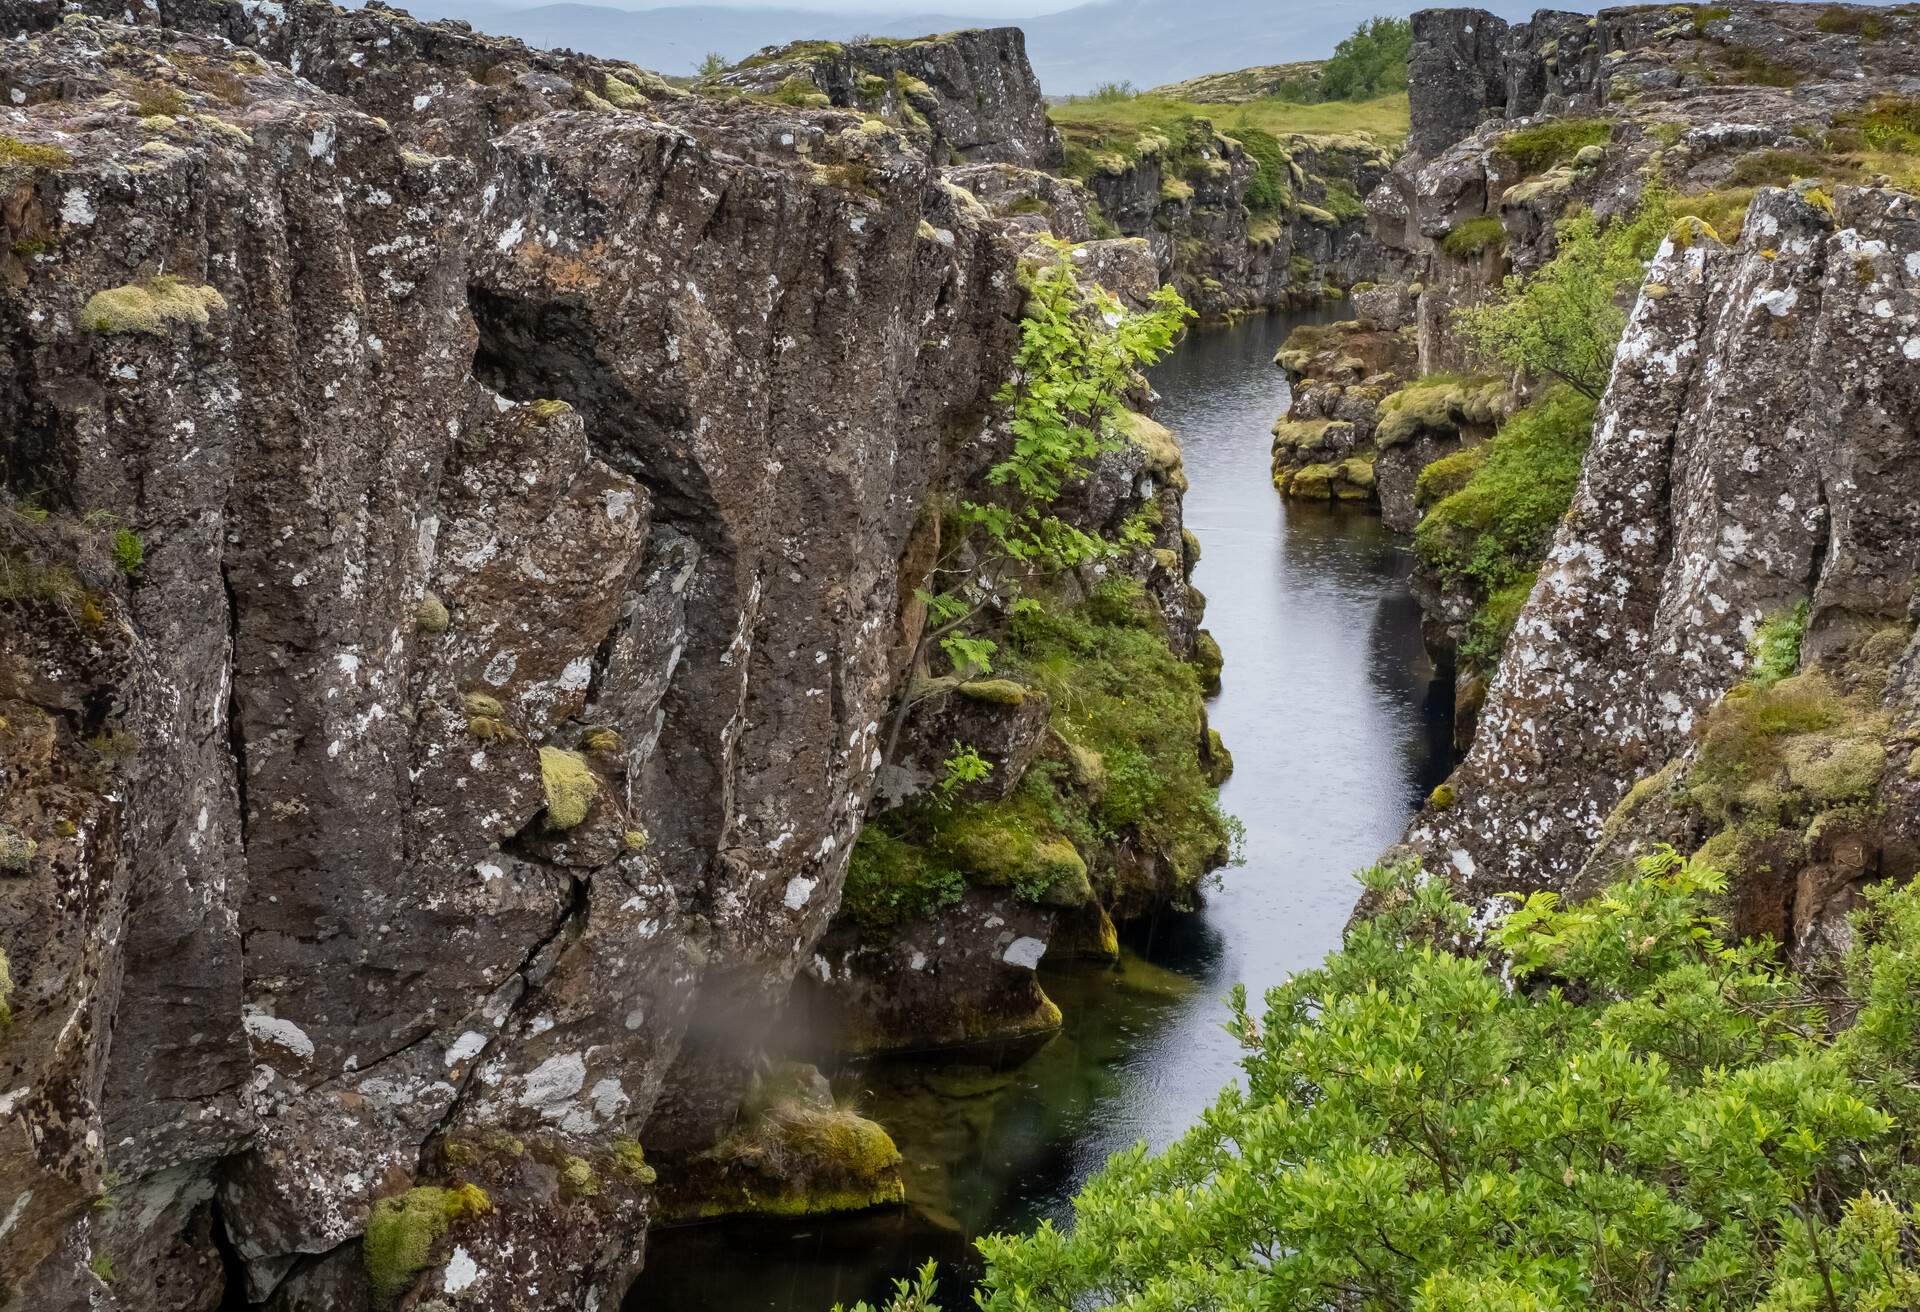 Awe-inspiring view of the Silfra a rift formed by the Mid-Atlantic Ridge as the North American and Eurasian tectonic plates diverge. Thingvellir National Park, Iceland